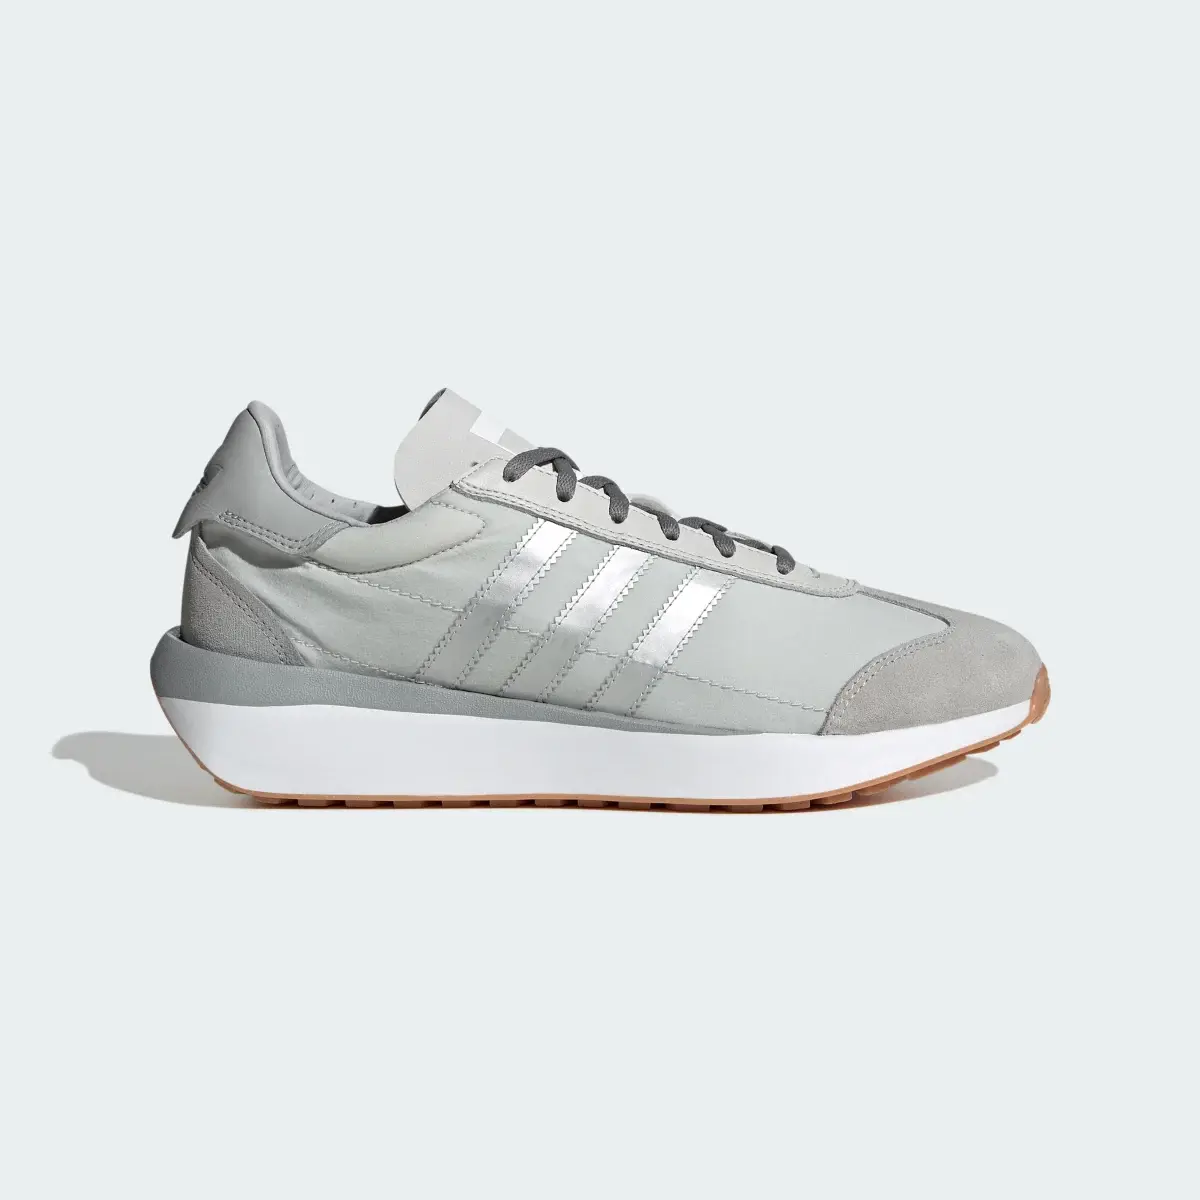 Adidas Country XLG Shoes. 2